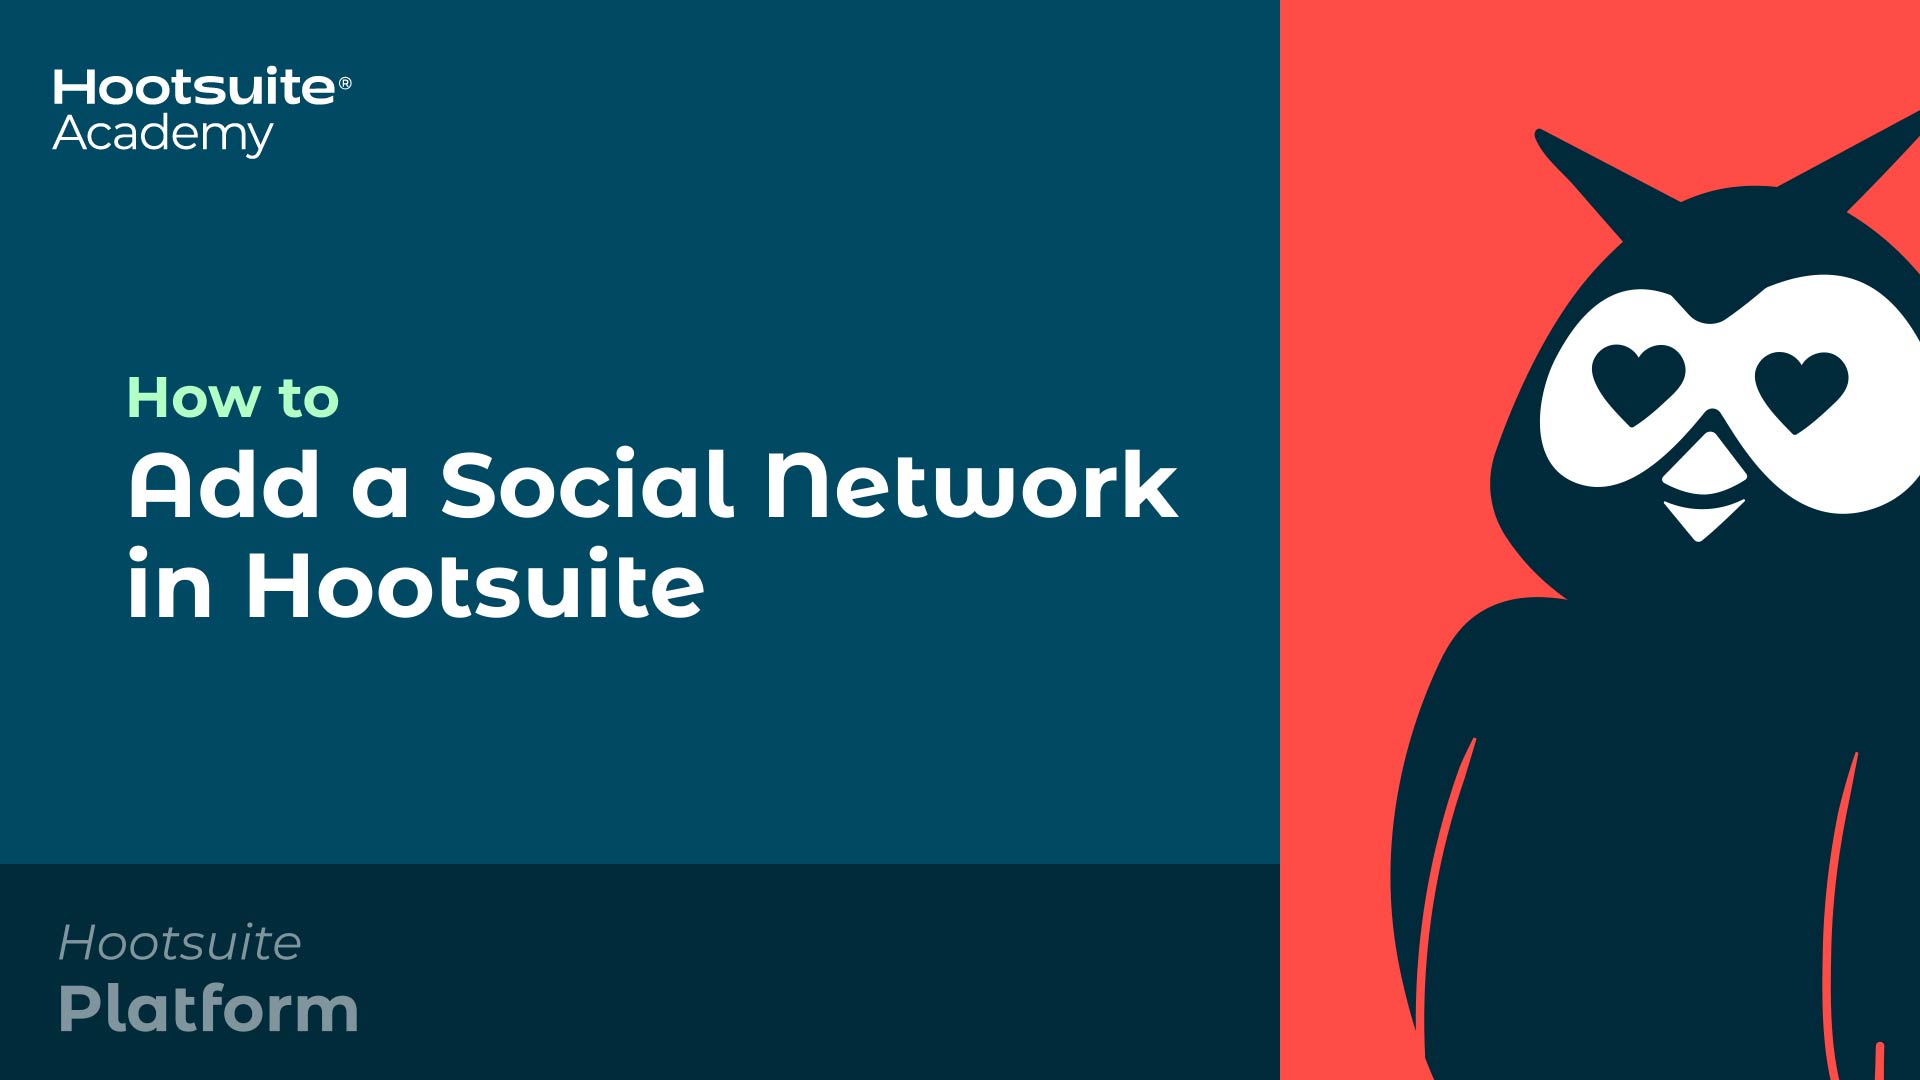 How to add a social network in Hootsuite video.